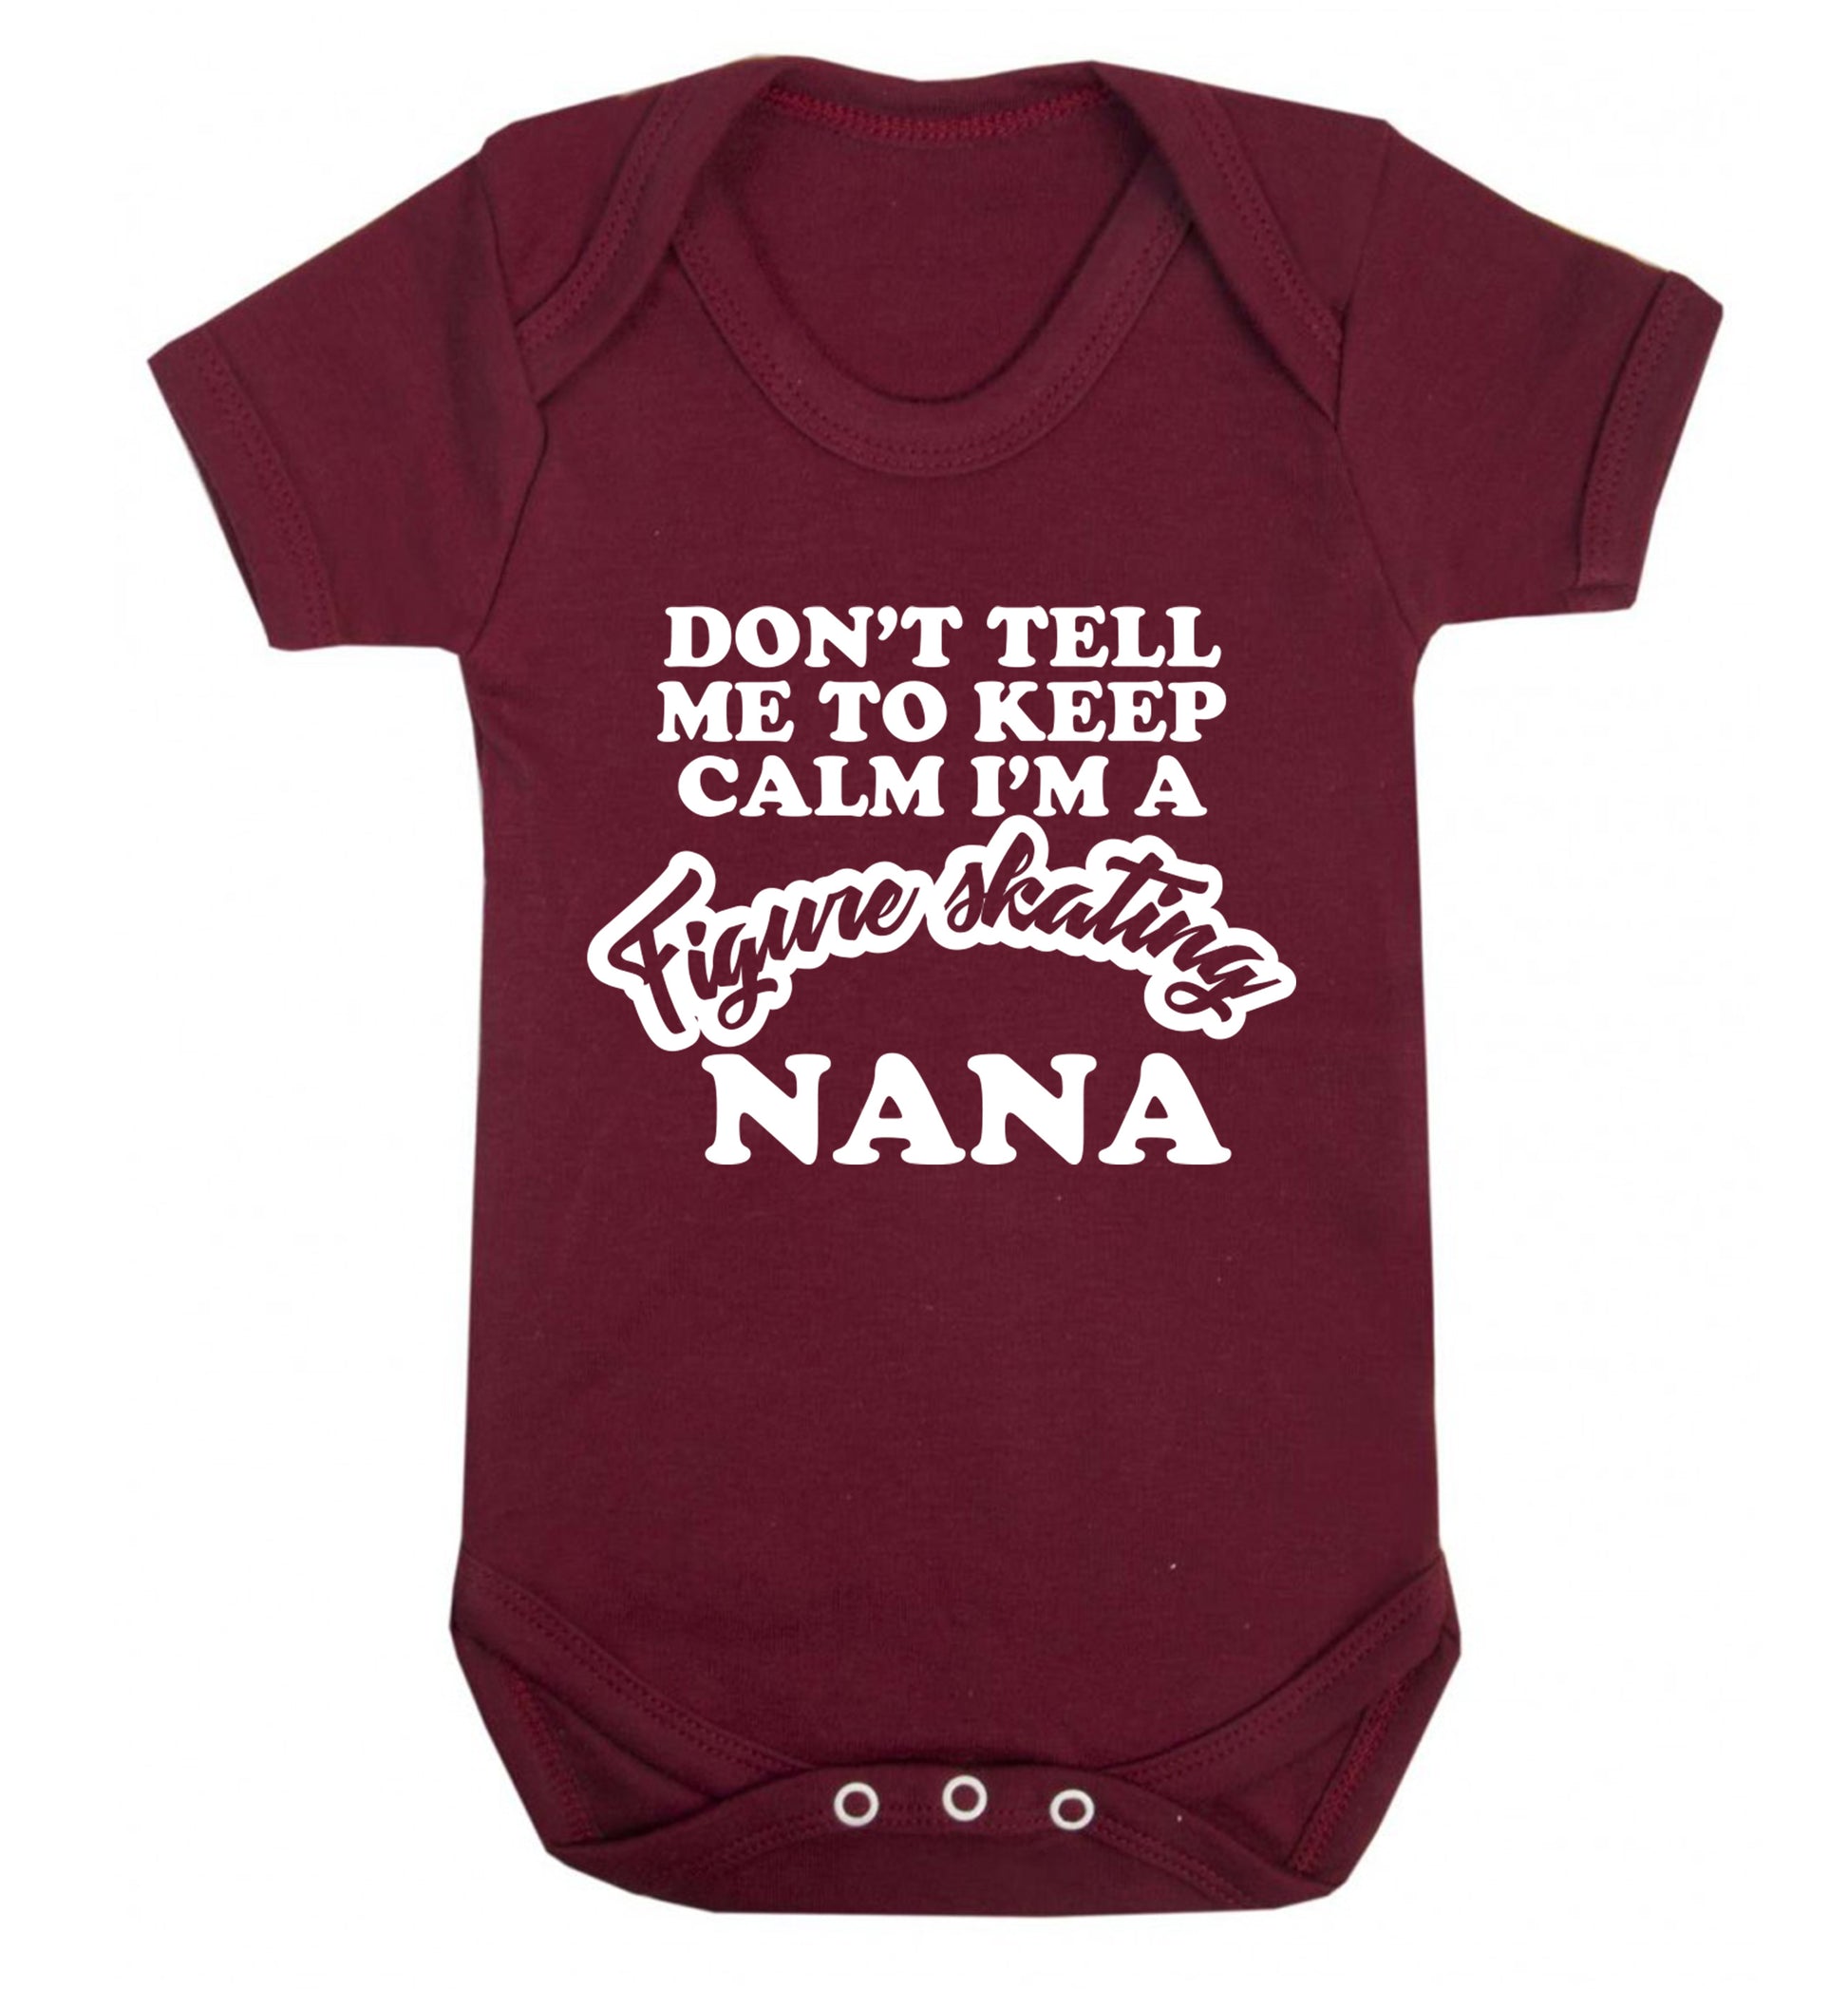 Don't tell me to keep calm I'm a figure skating nana Baby Vest maroon 18-24 months